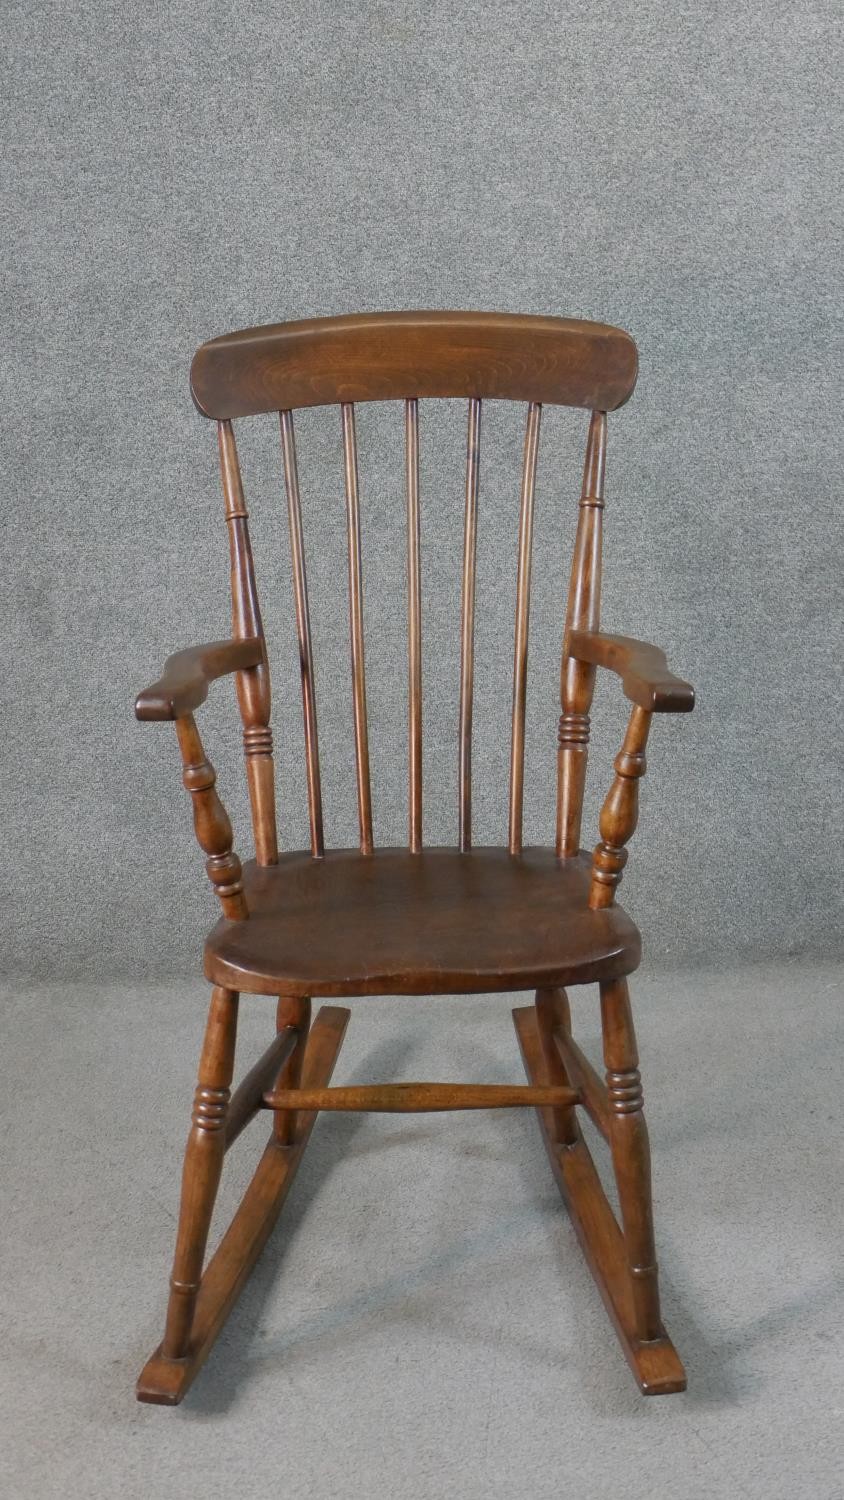 A 19th century style comb back rocking chair, with an elm seat, on turned legs joined by stretchers.